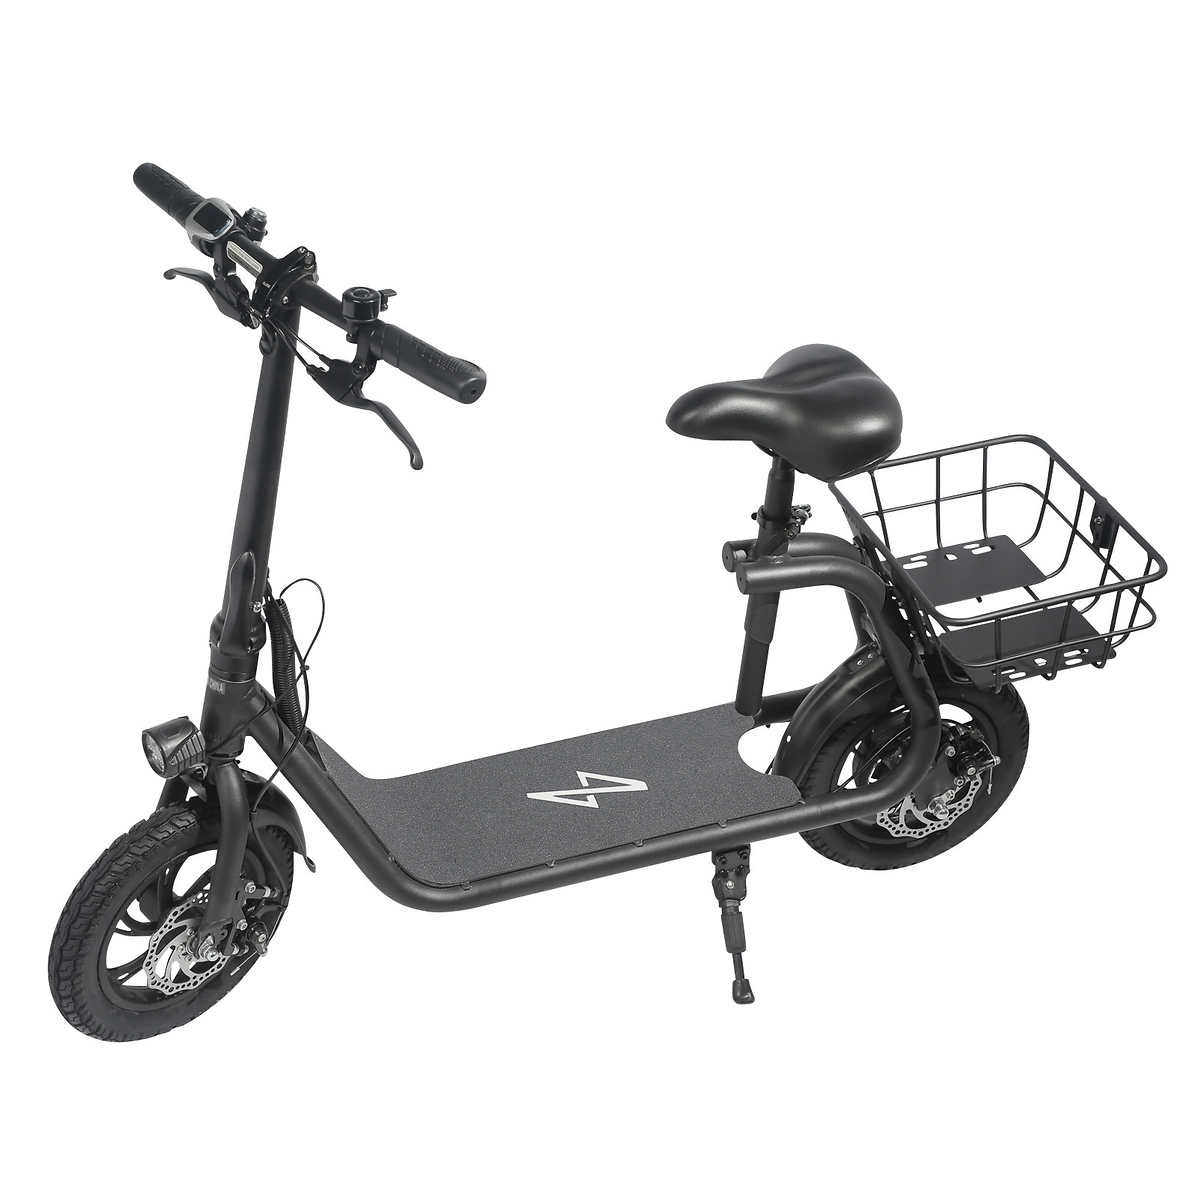 Phantom R1 Seated Electric Scooter | Costco